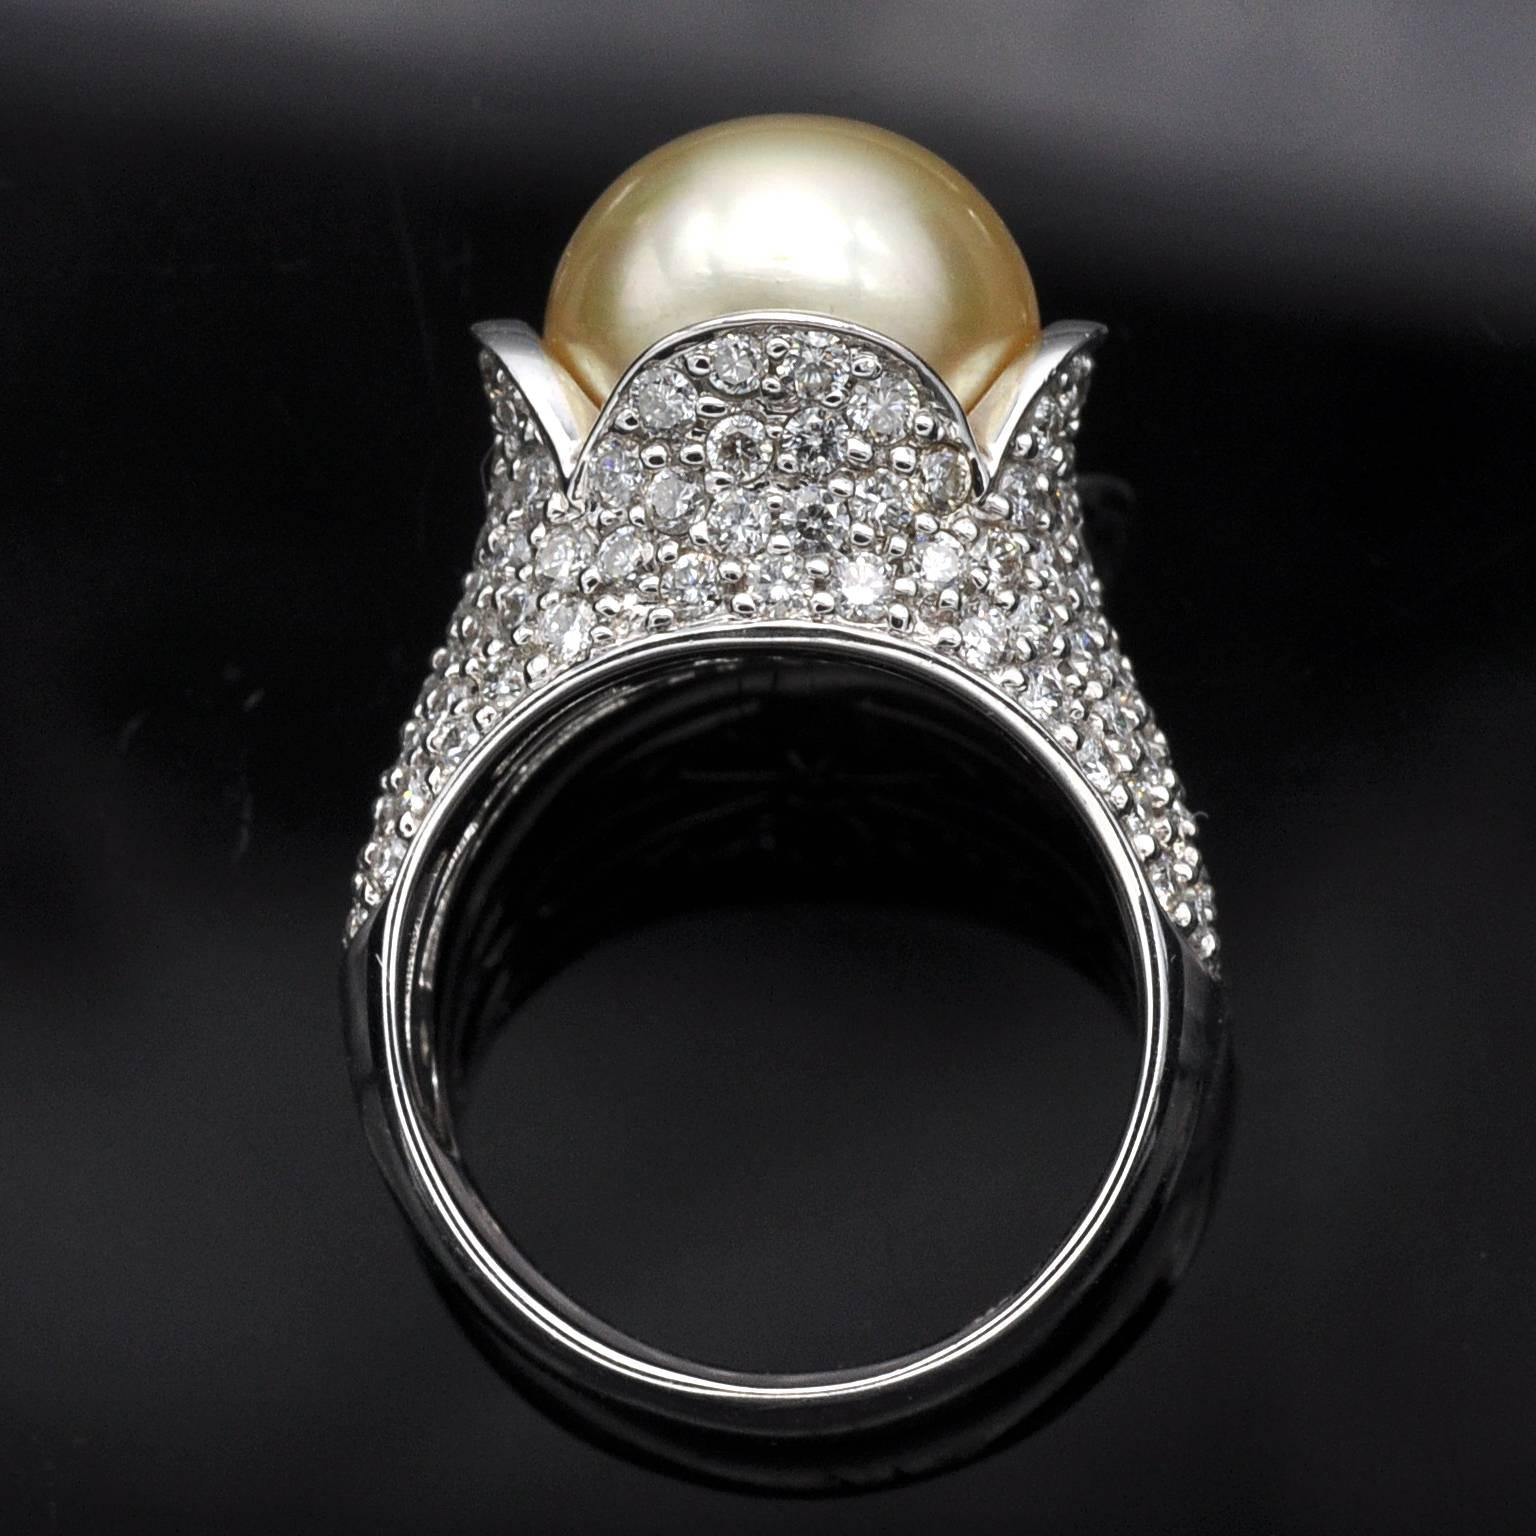 A golden pearl nested in a flower like 18 Karat gold cocktail ring pavé set with white diamond .
The design is timeless and fashionable. 
White diamonds: 2.35 carat
18KT gold , French Hallmark stamp
Pearl: 12mm